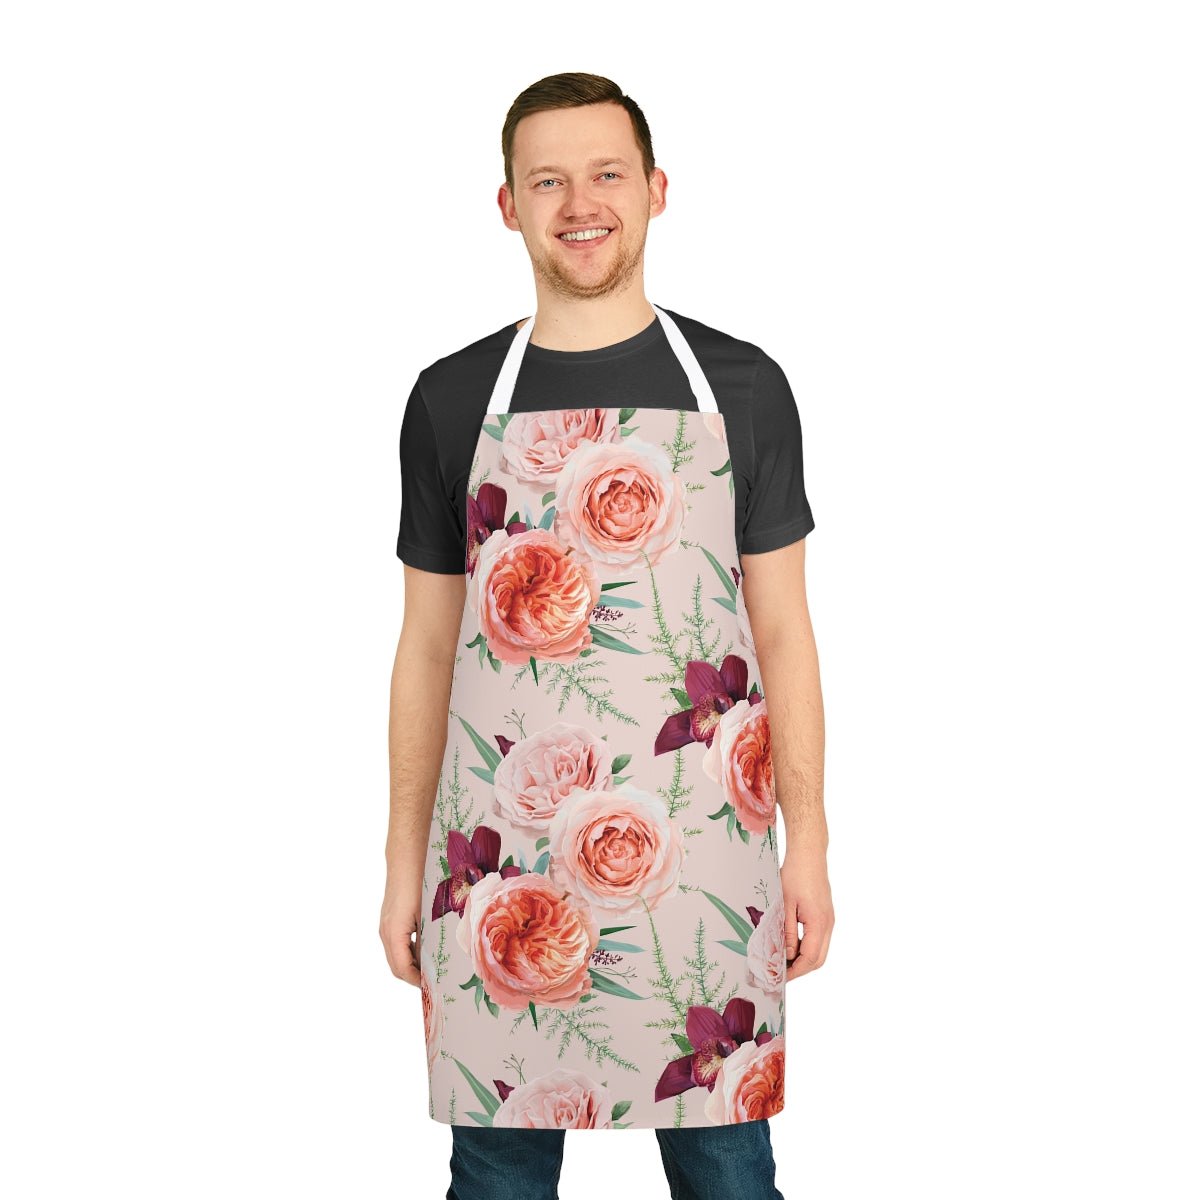 Blush Roses Apron - Puffin Lime